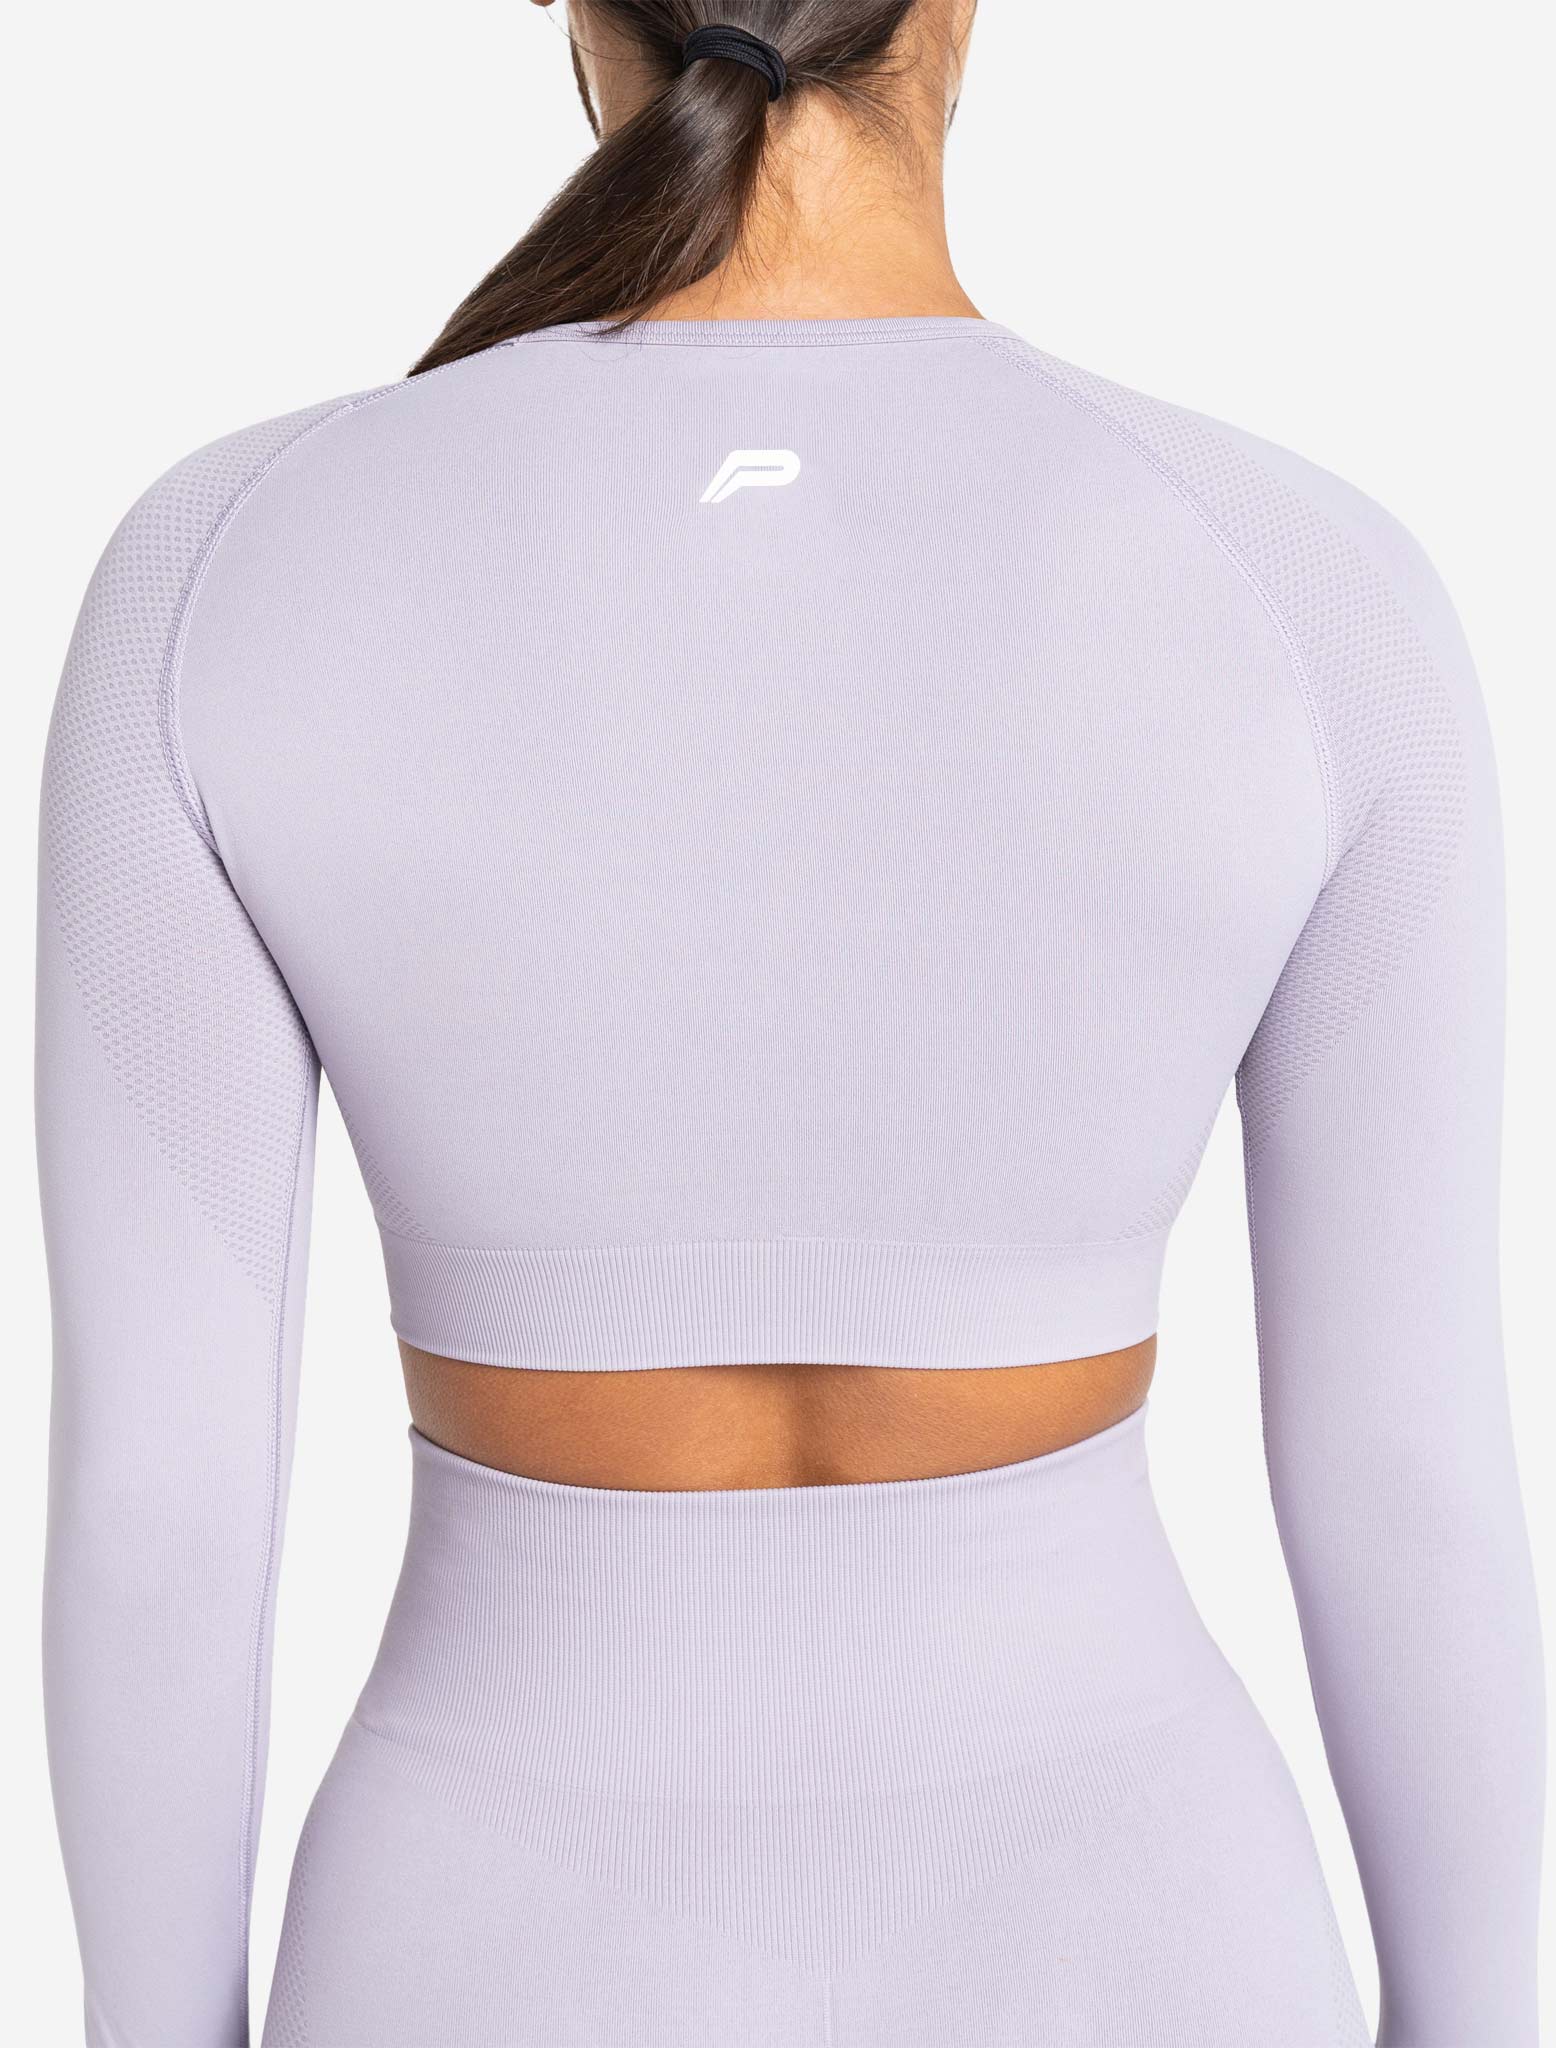  FREEYE Seamless Compression Crop Workout Tops Long